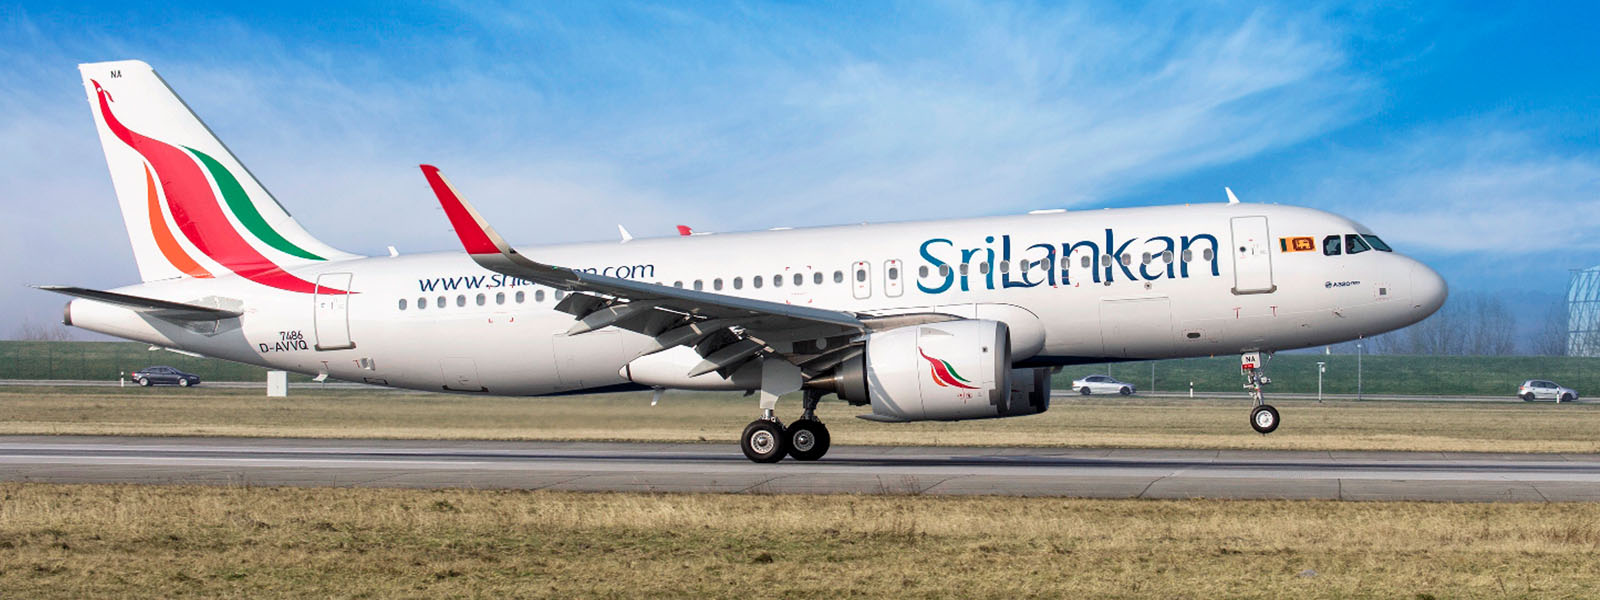 Report on SriLankan Airlines submitted